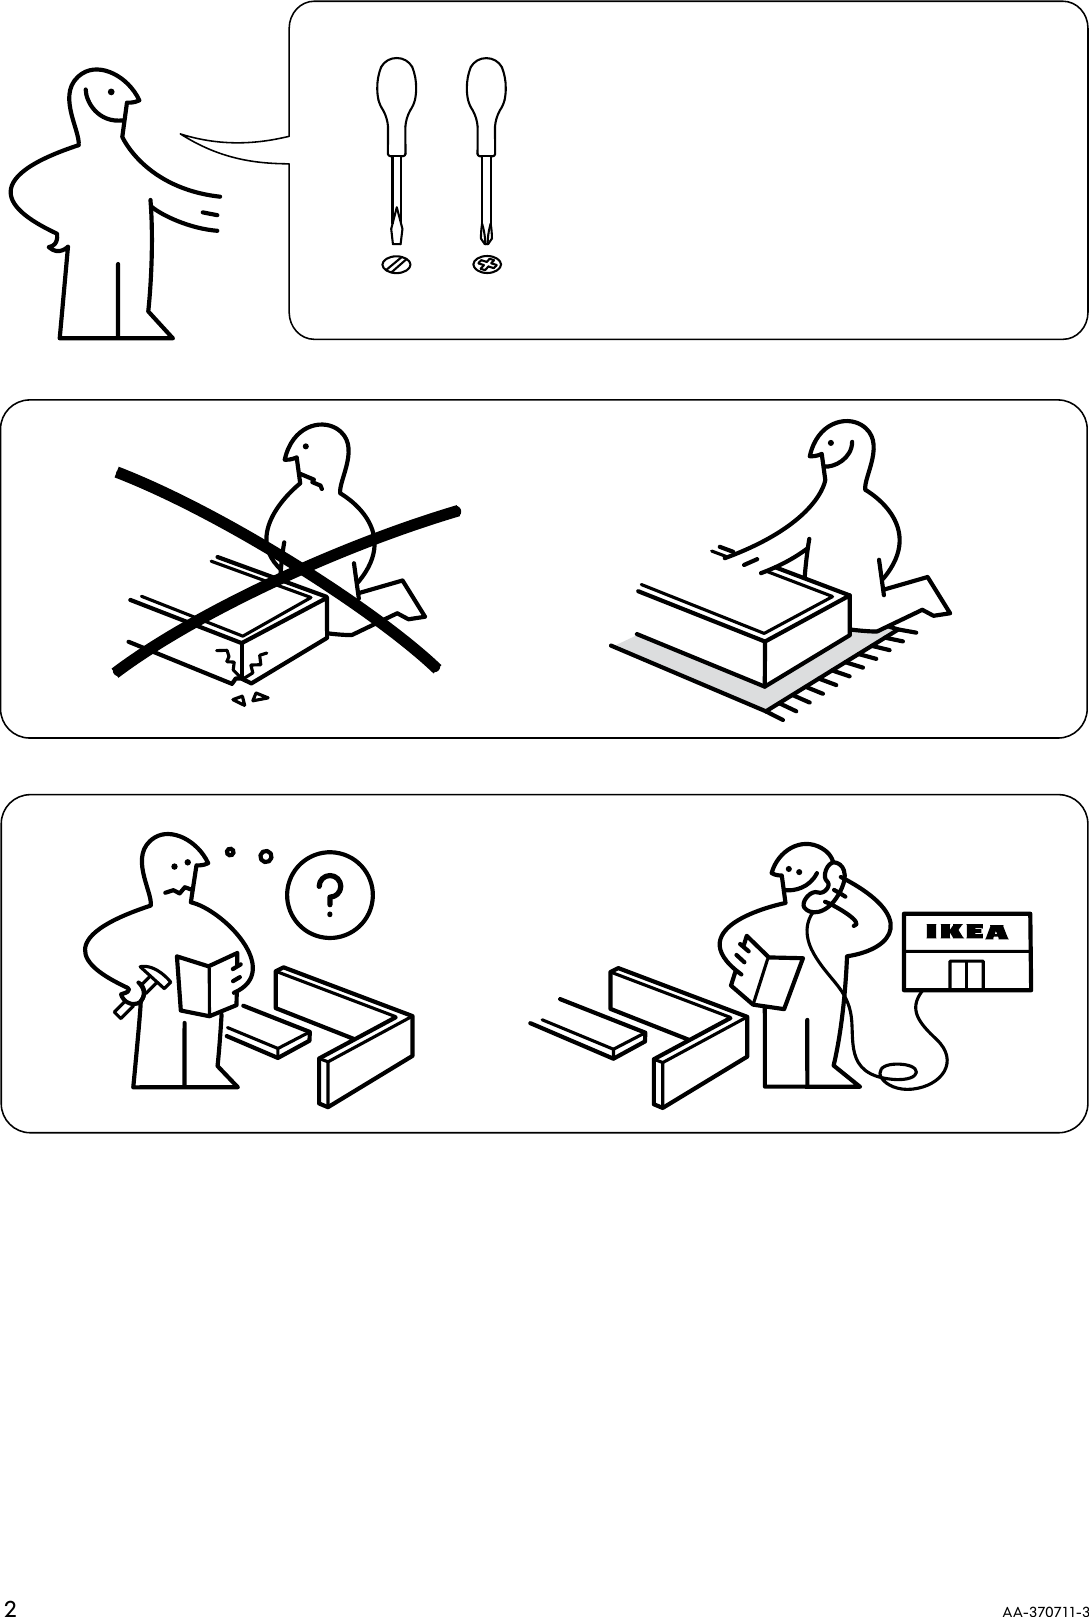 Page 2 of 8 - Ikea Ikea-Poang-Rocking-Chair-Frame-Assembly-Instruction